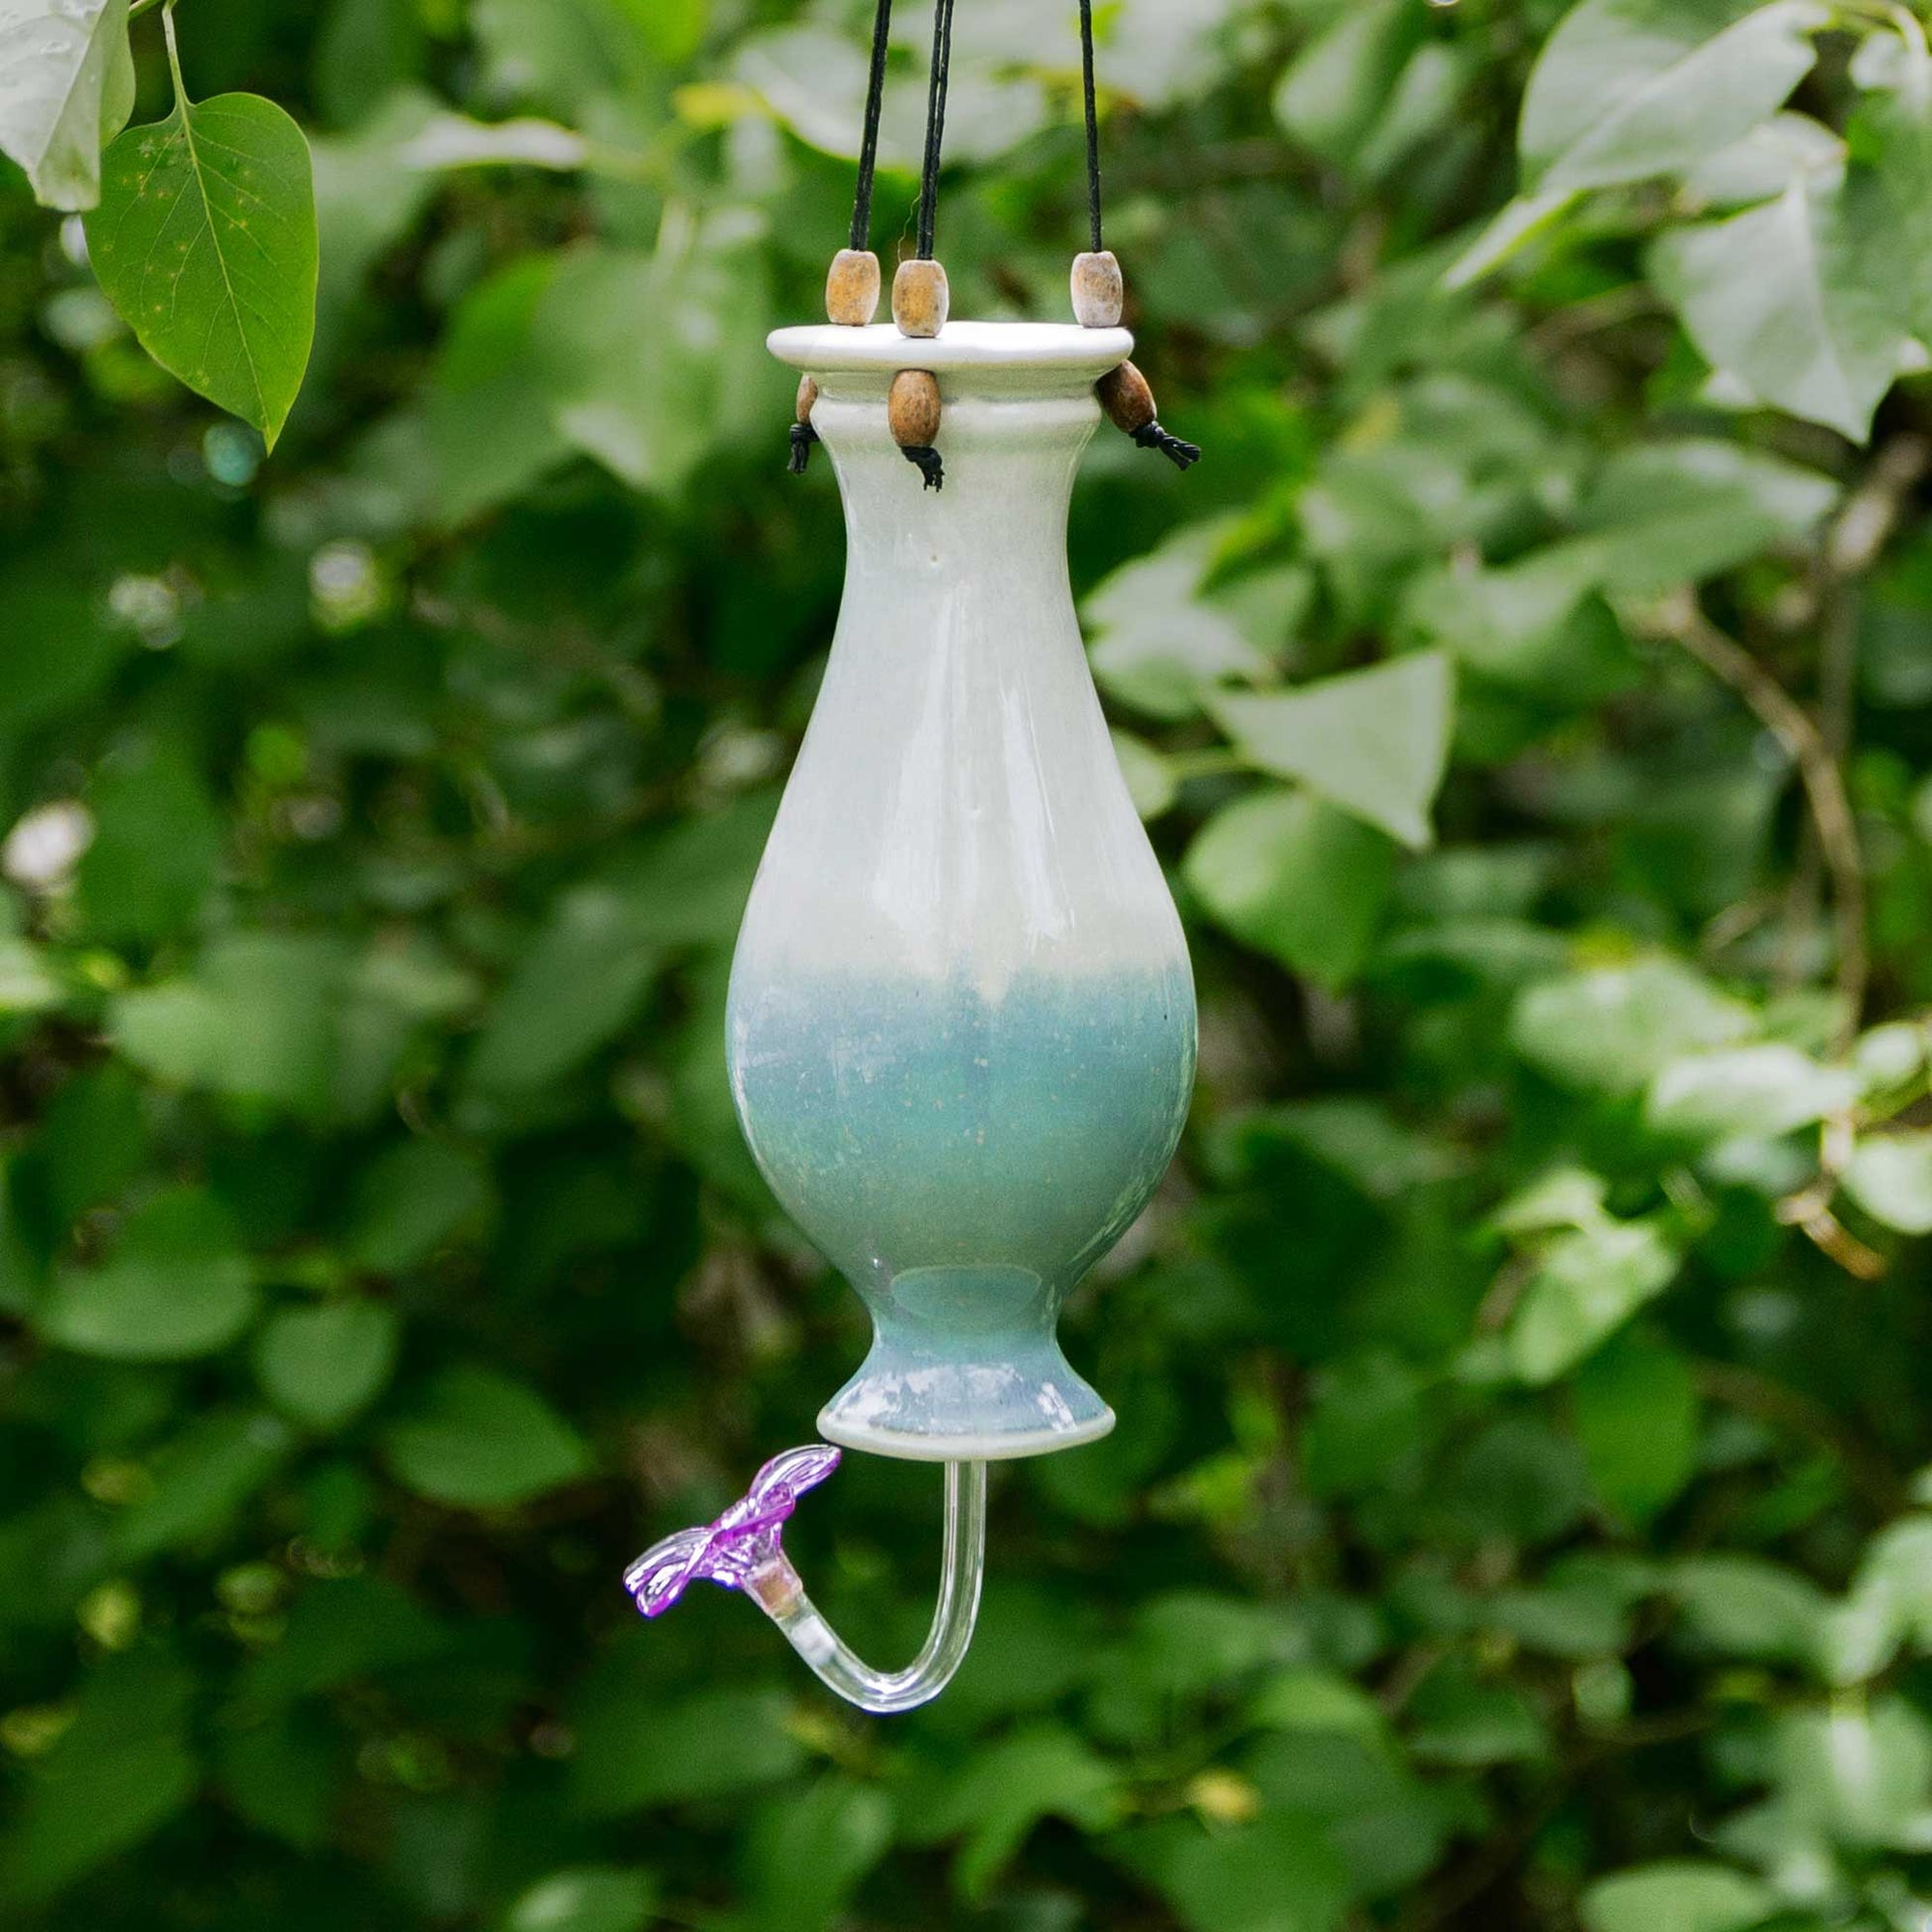 Handmade Pottery Bottle Hummingbird Feeder in Ivory & Blue pattern made by Georgetown Pottery in Maine